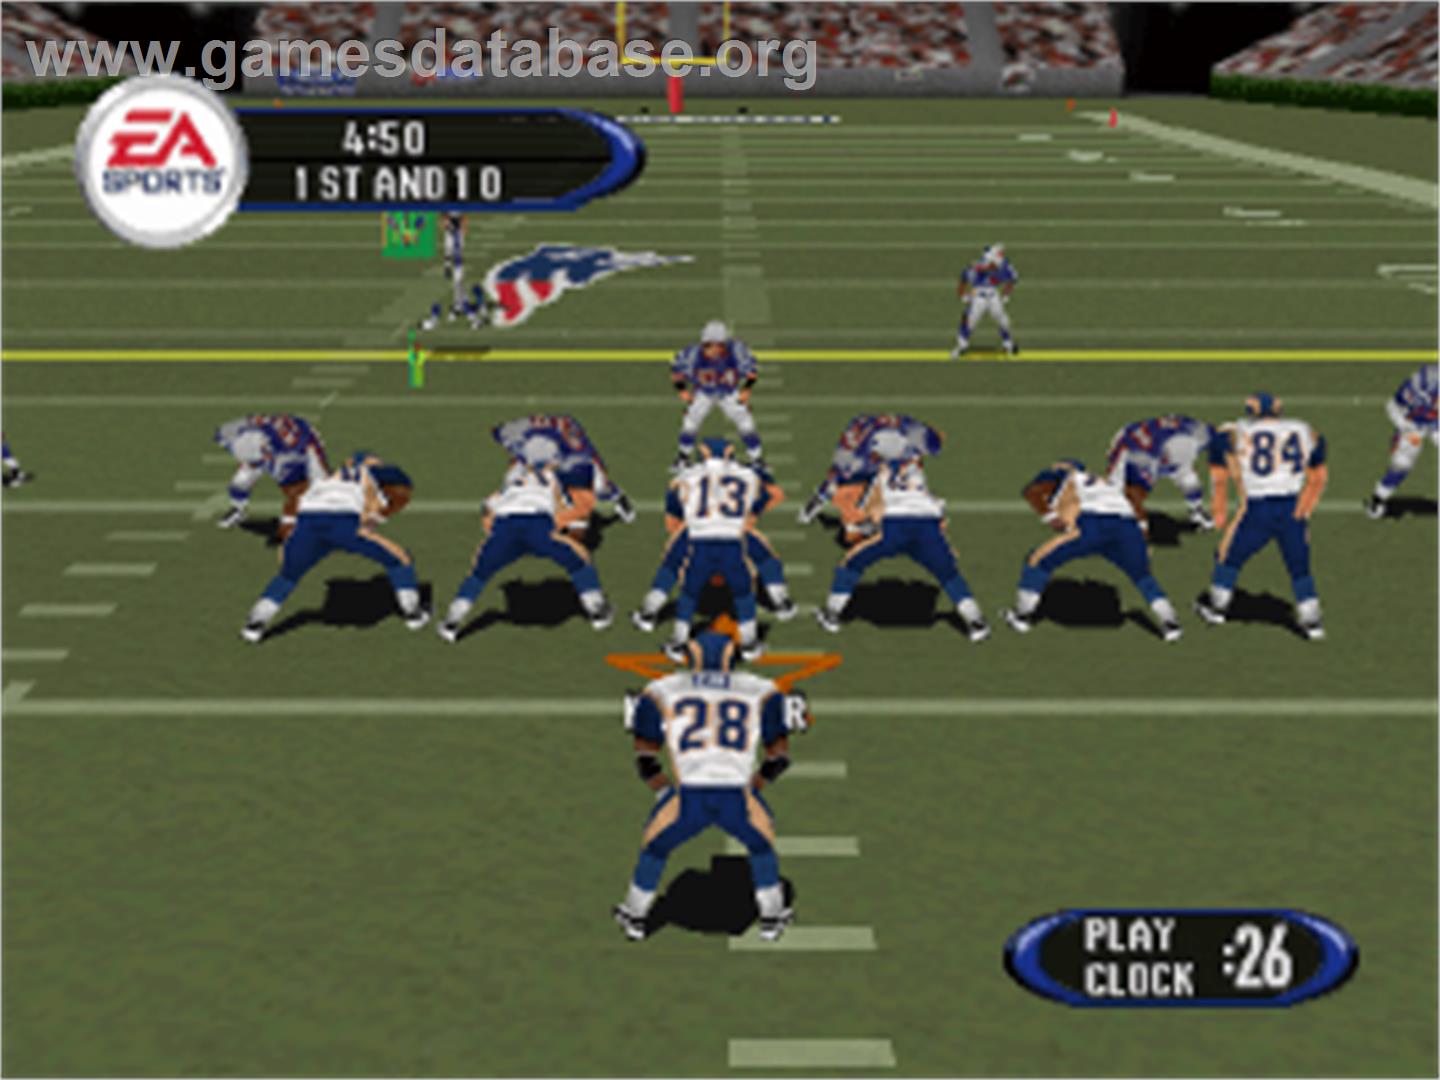 Madden NFL 2003 - Sony Playstation - Artwork - In Game